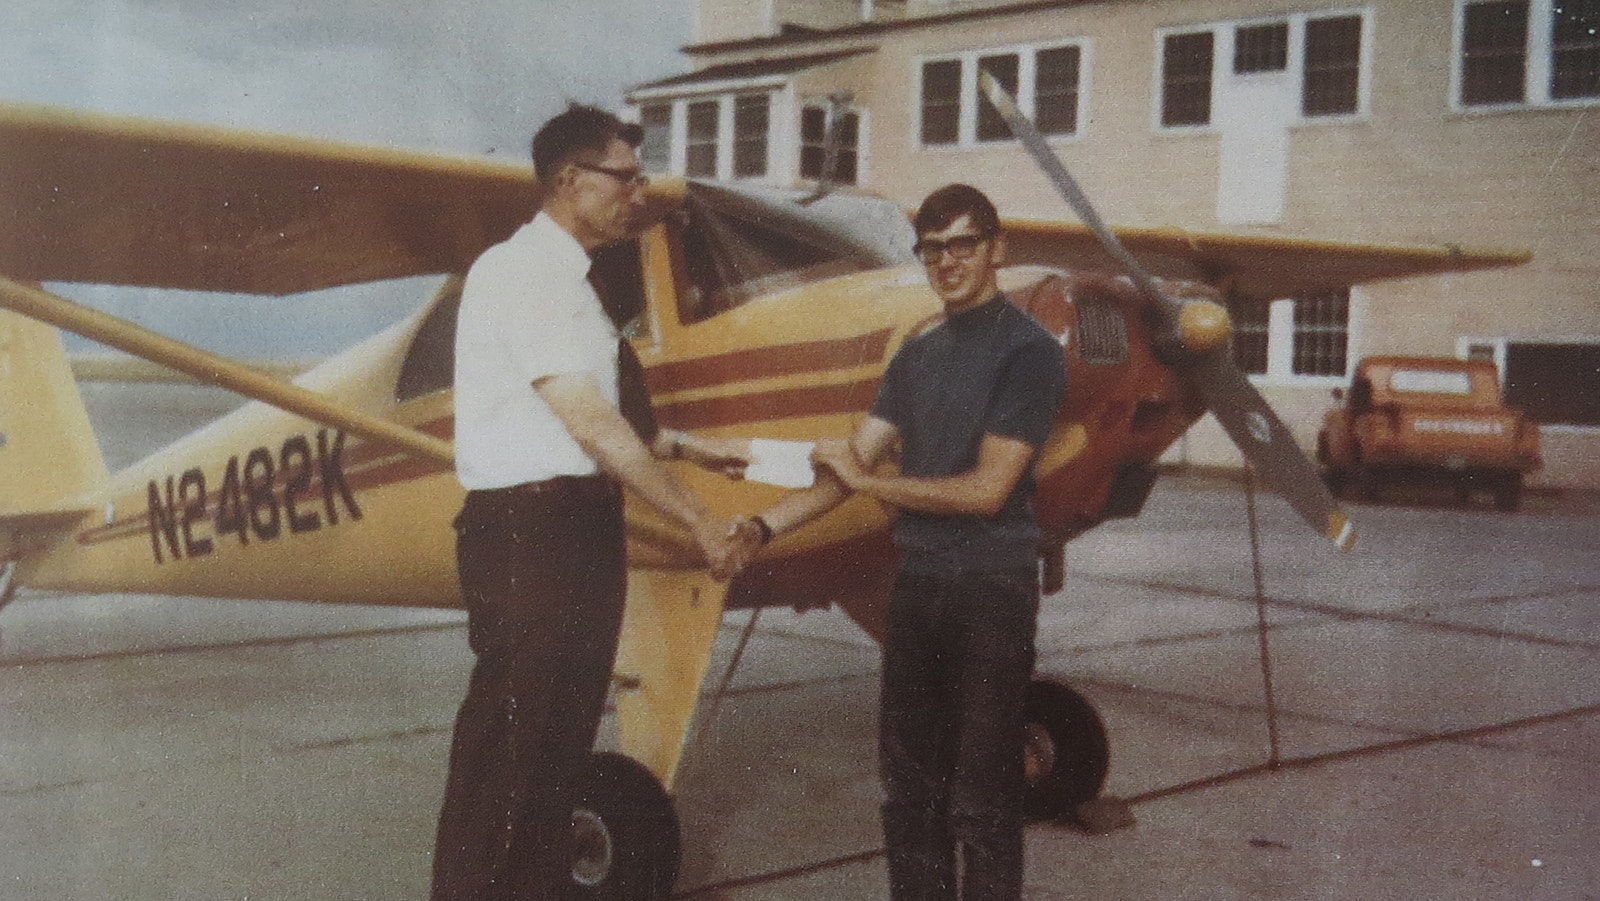 Dallas Chopping received his private pilot license while a senior in high school in 1971.